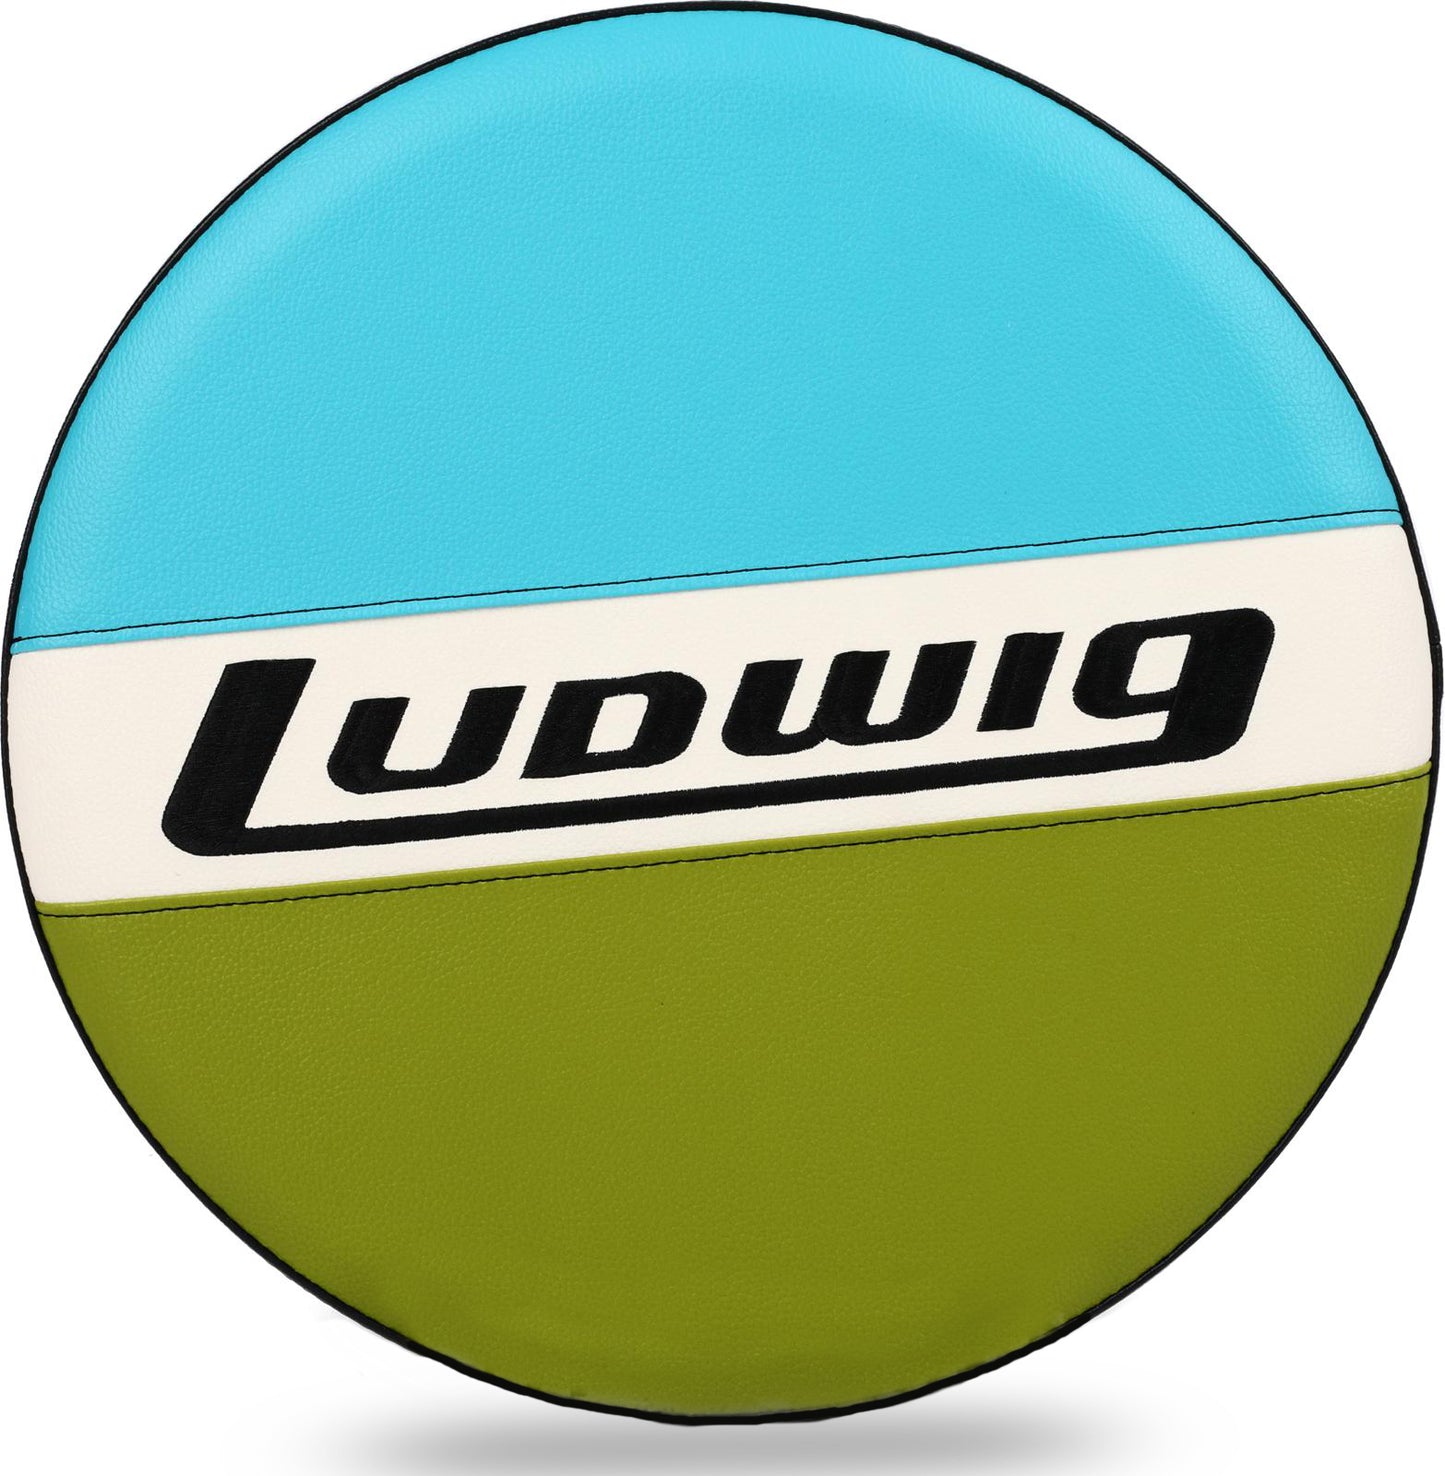 Ludwig LAC49TH Atlas Classic Drum Throne Lightweight Height Adjustable Round Seat Stool Chair